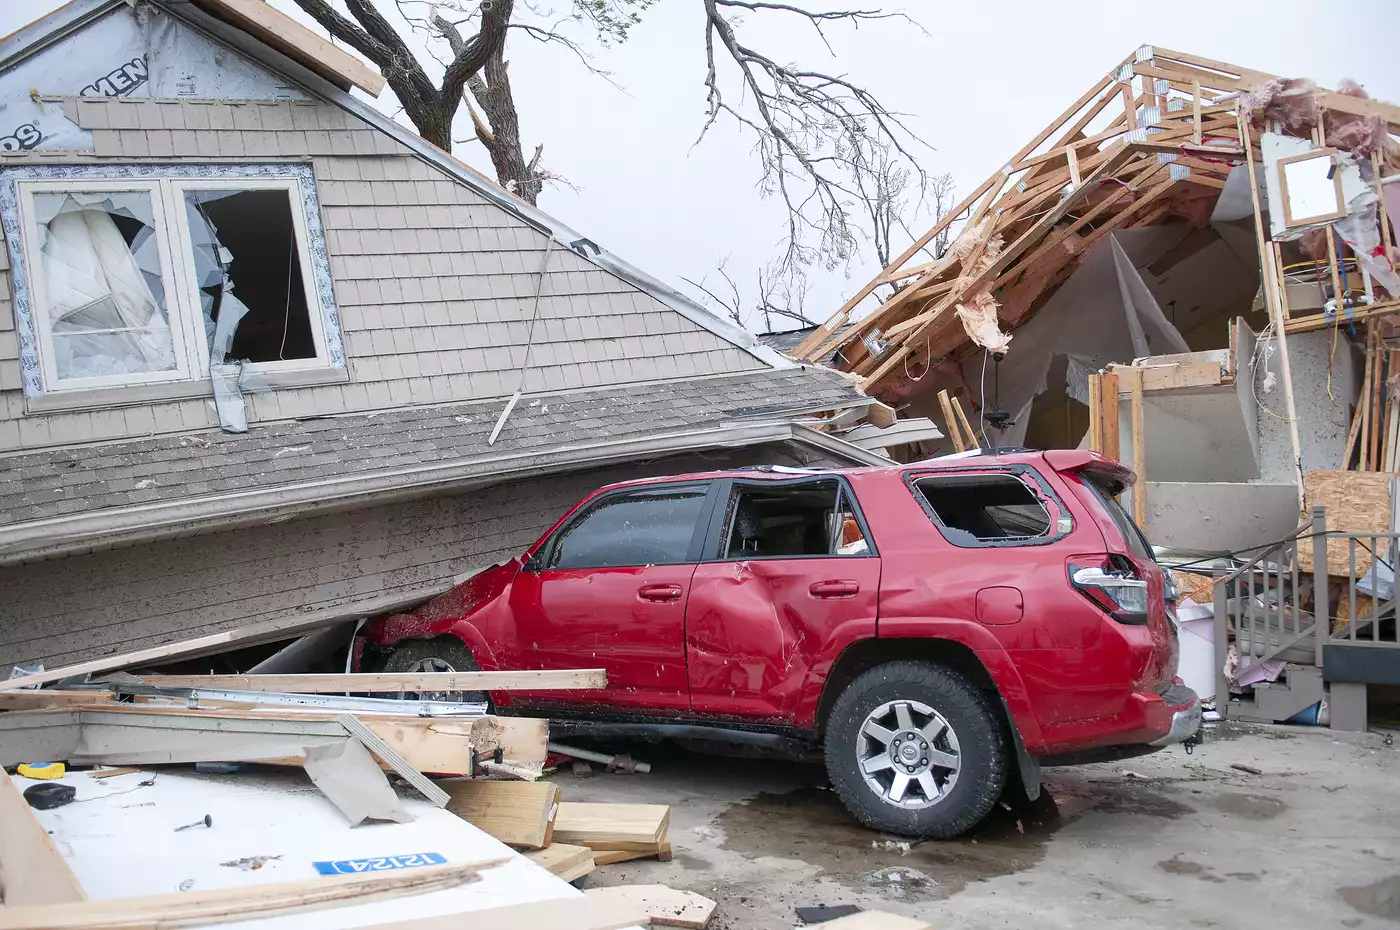 The Striking Aftermath of Memorial Day Tornadoes